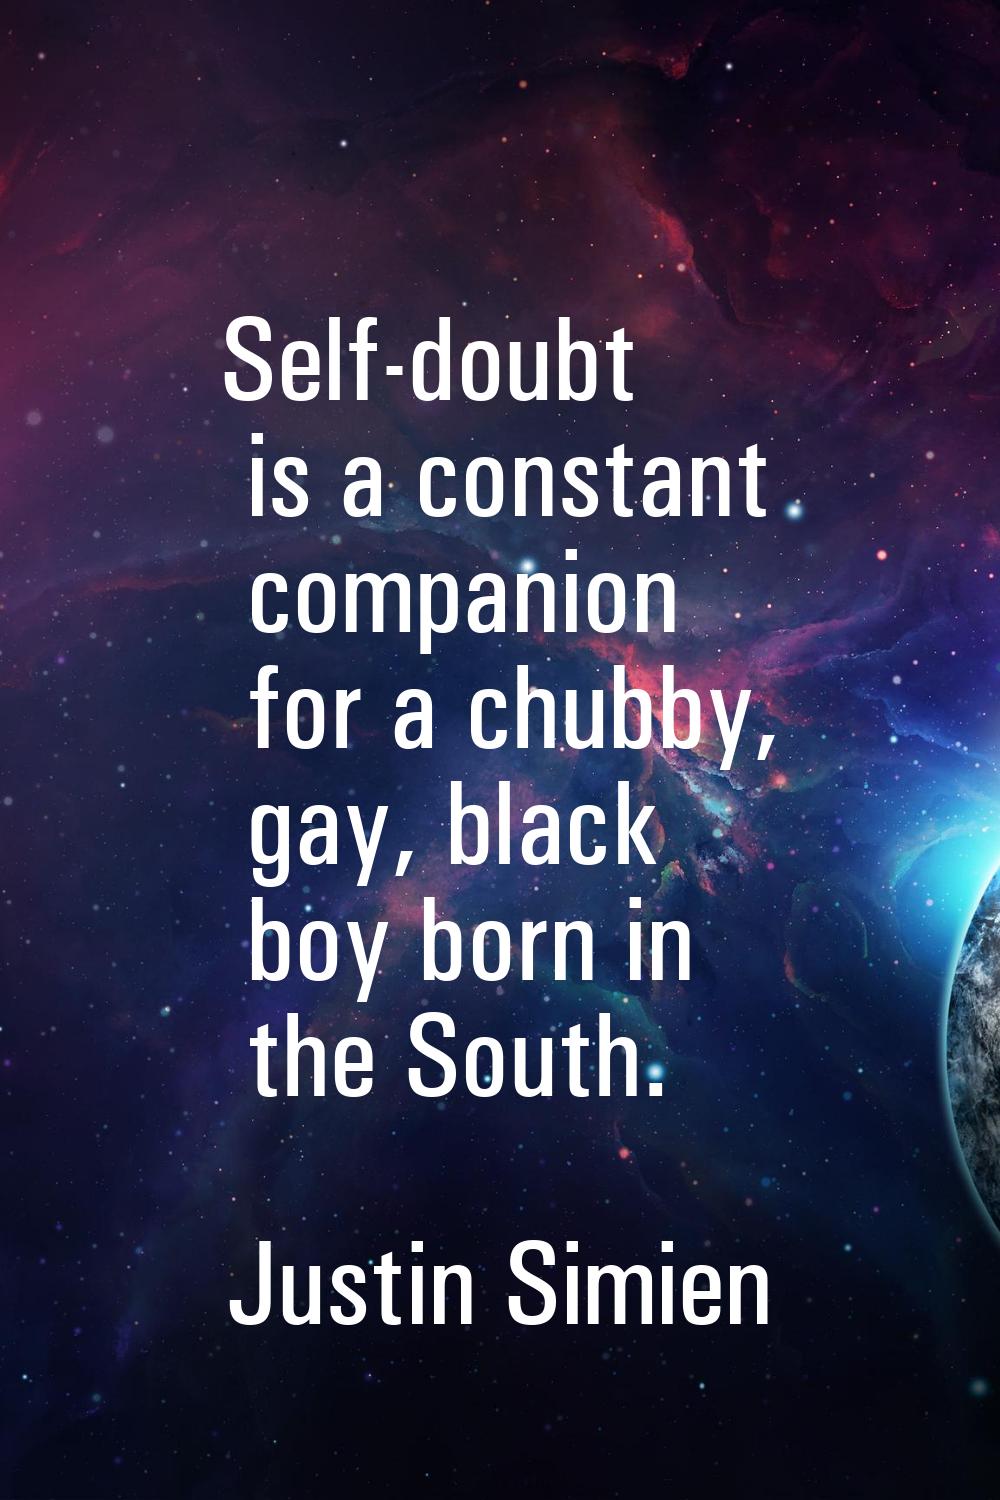 Self-doubt is a constant companion for a chubby, gay, black boy born in the South.